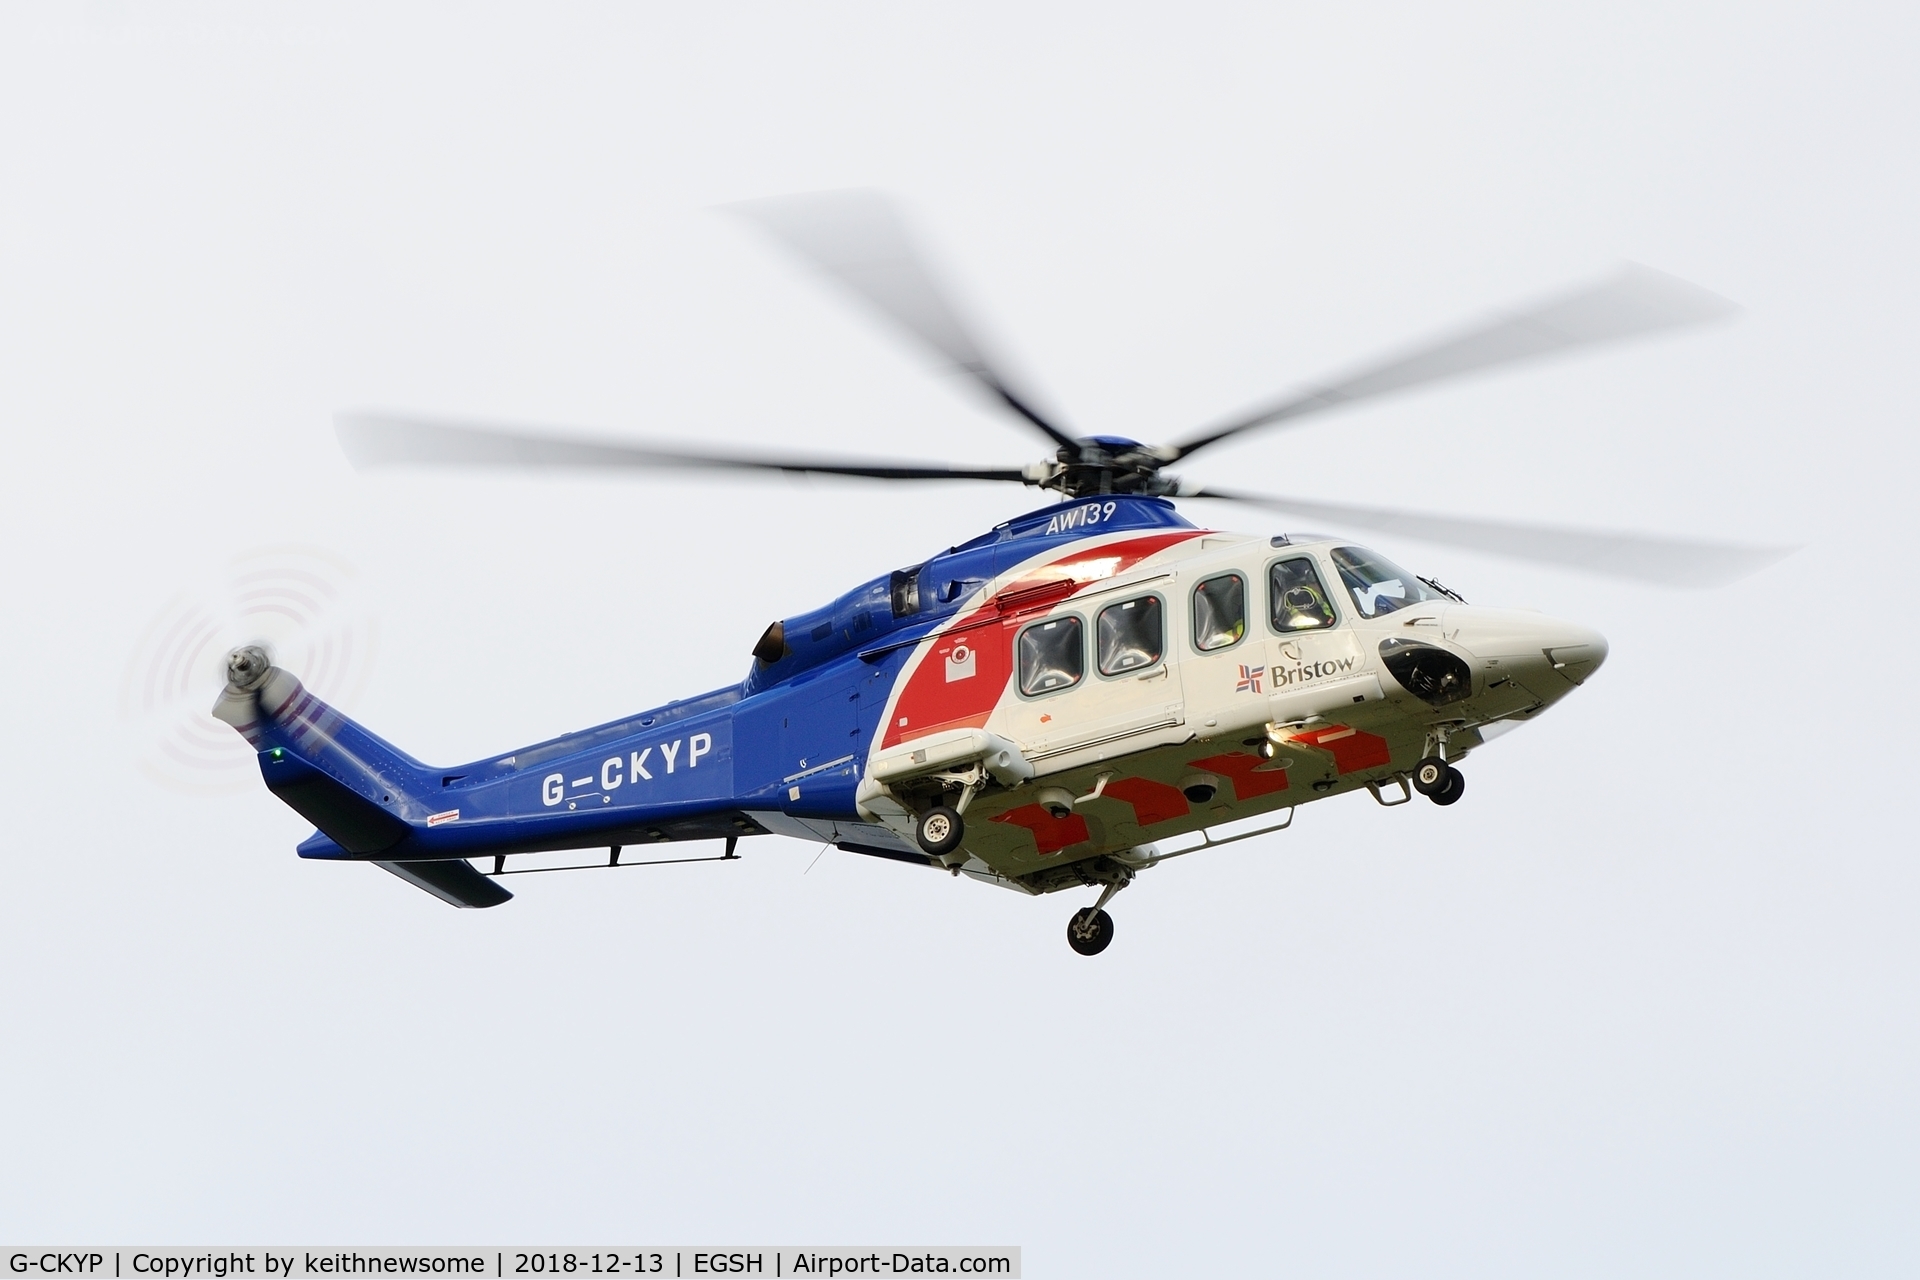 G-CKYP, 2013 AgustaWestland AW-139 C/N 41339, Carrying out air tests, formerly VH-ZFO.